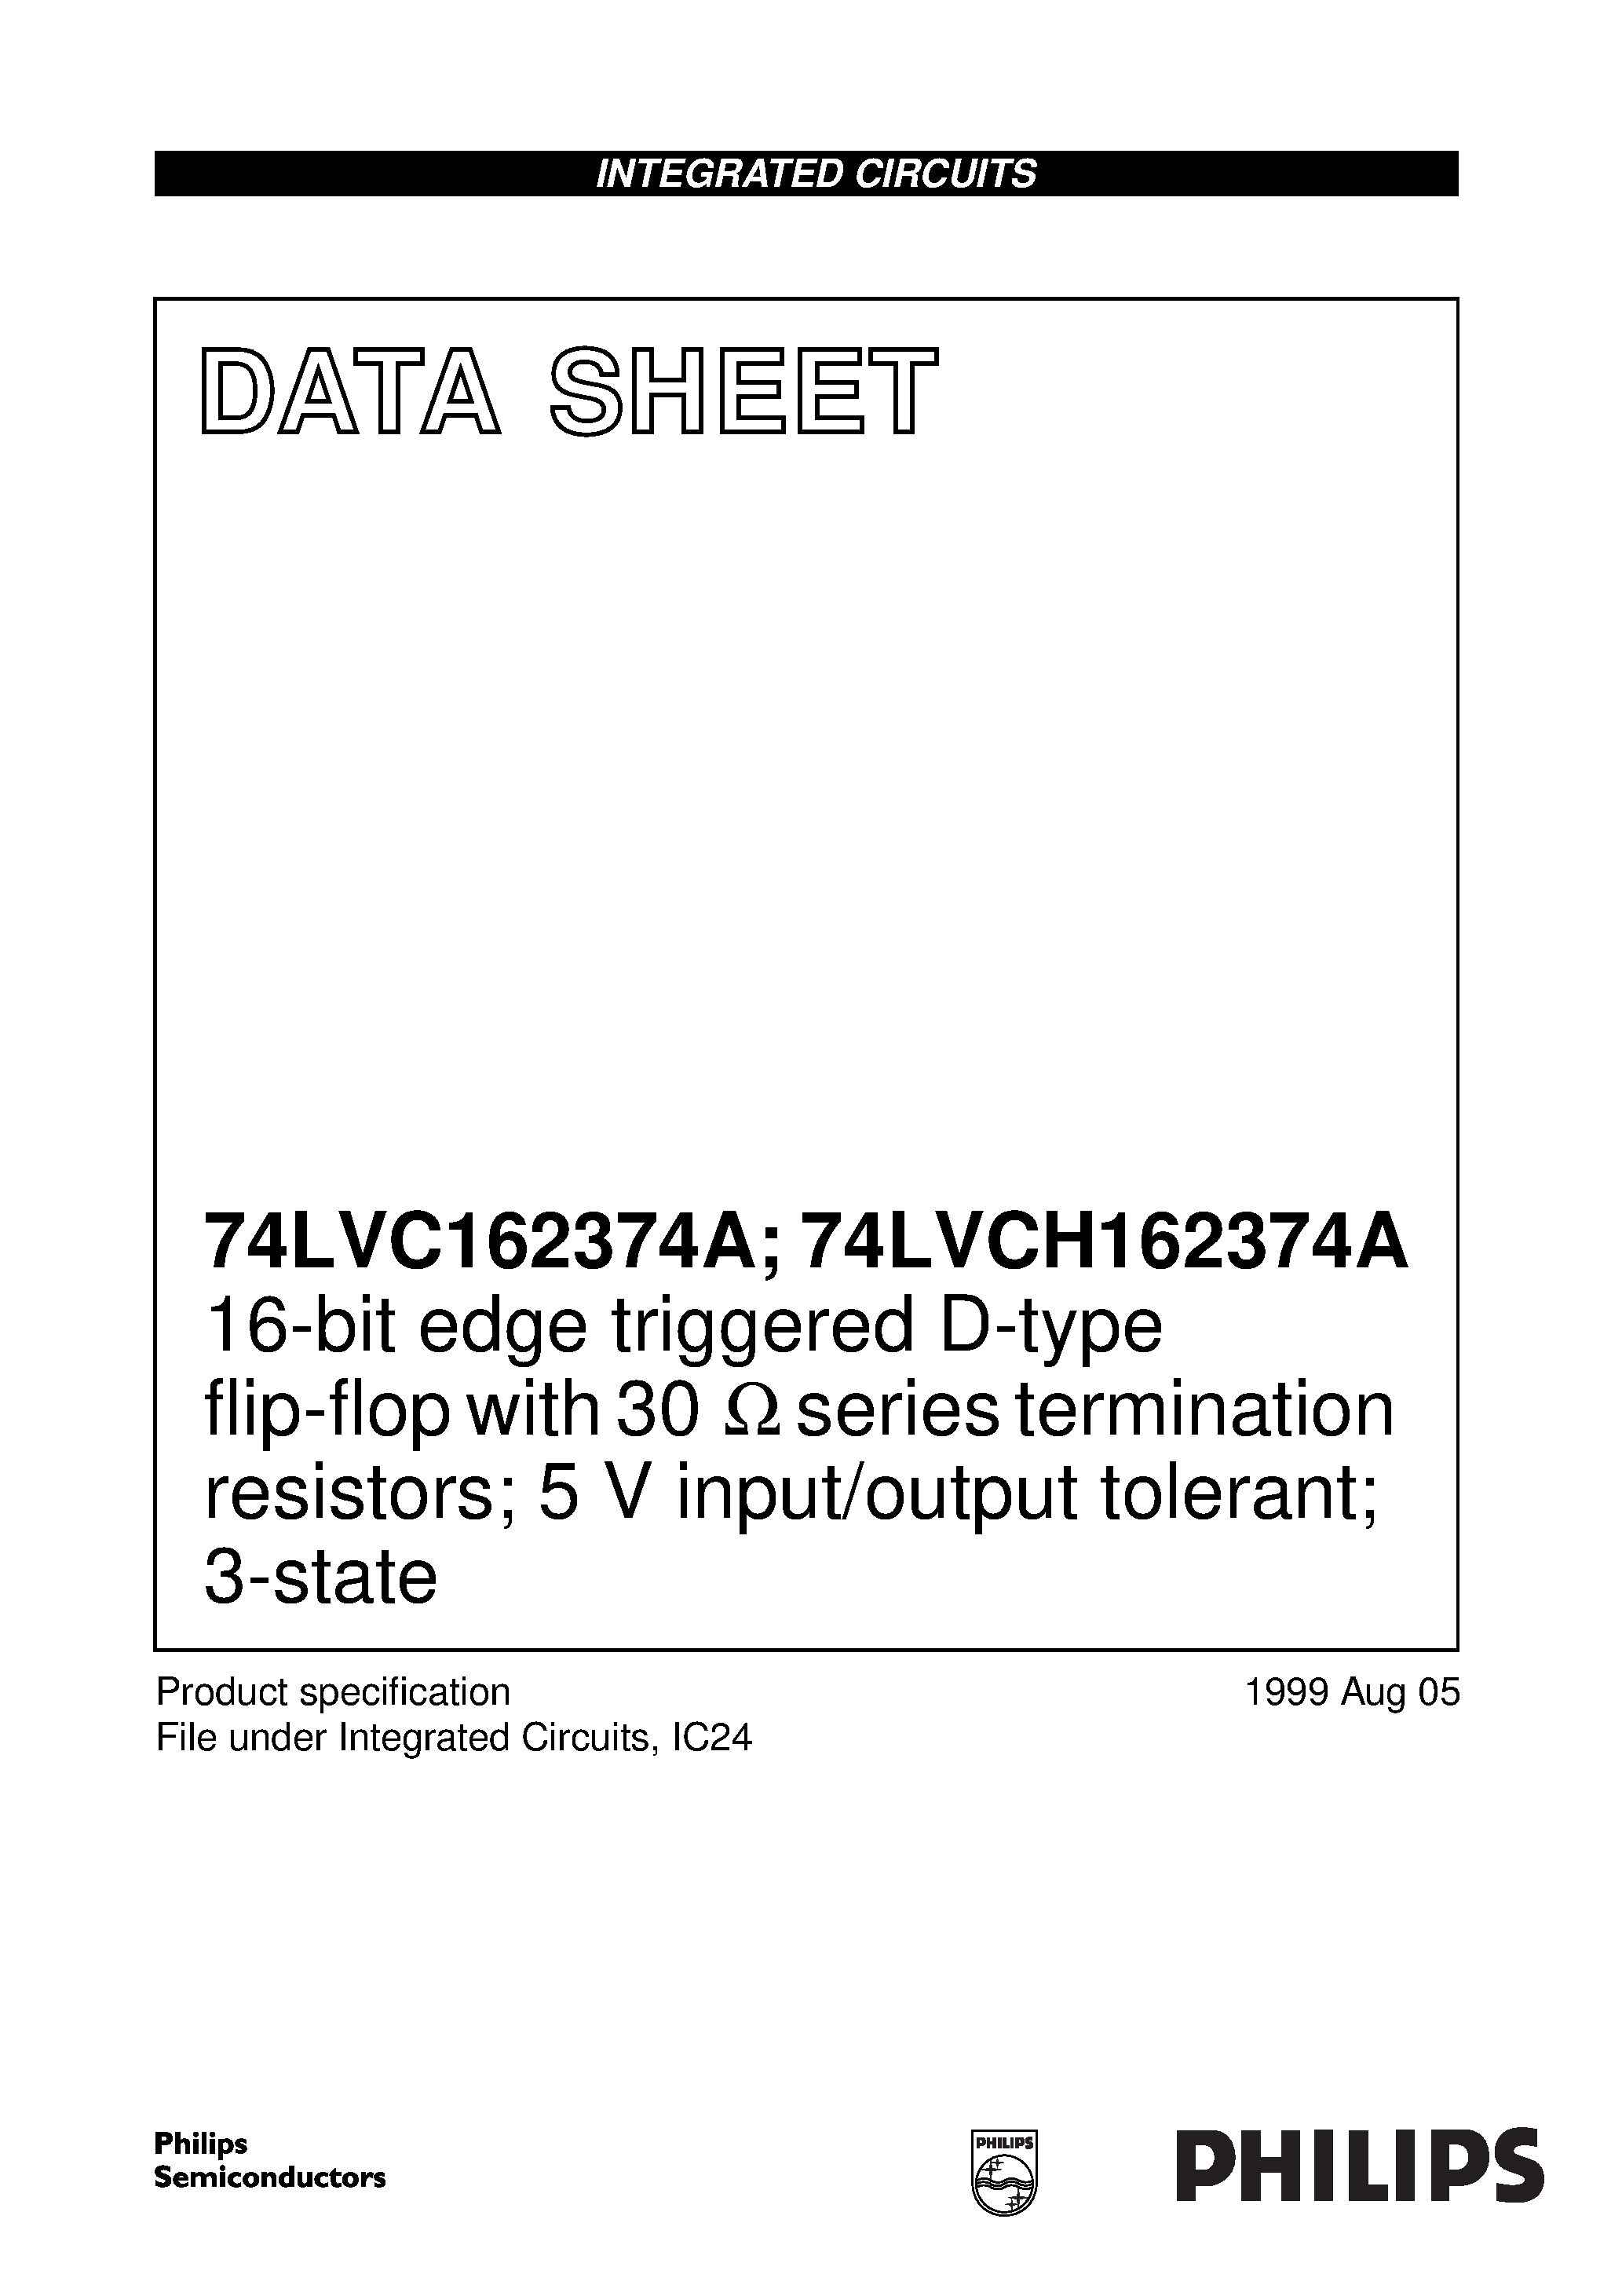 Datasheet VC162374ADGG - 16-bit edge triggered D-type flip-flop with 30 ohmseries termination resistors; 5 V input/output tolerant; 3-state page 1